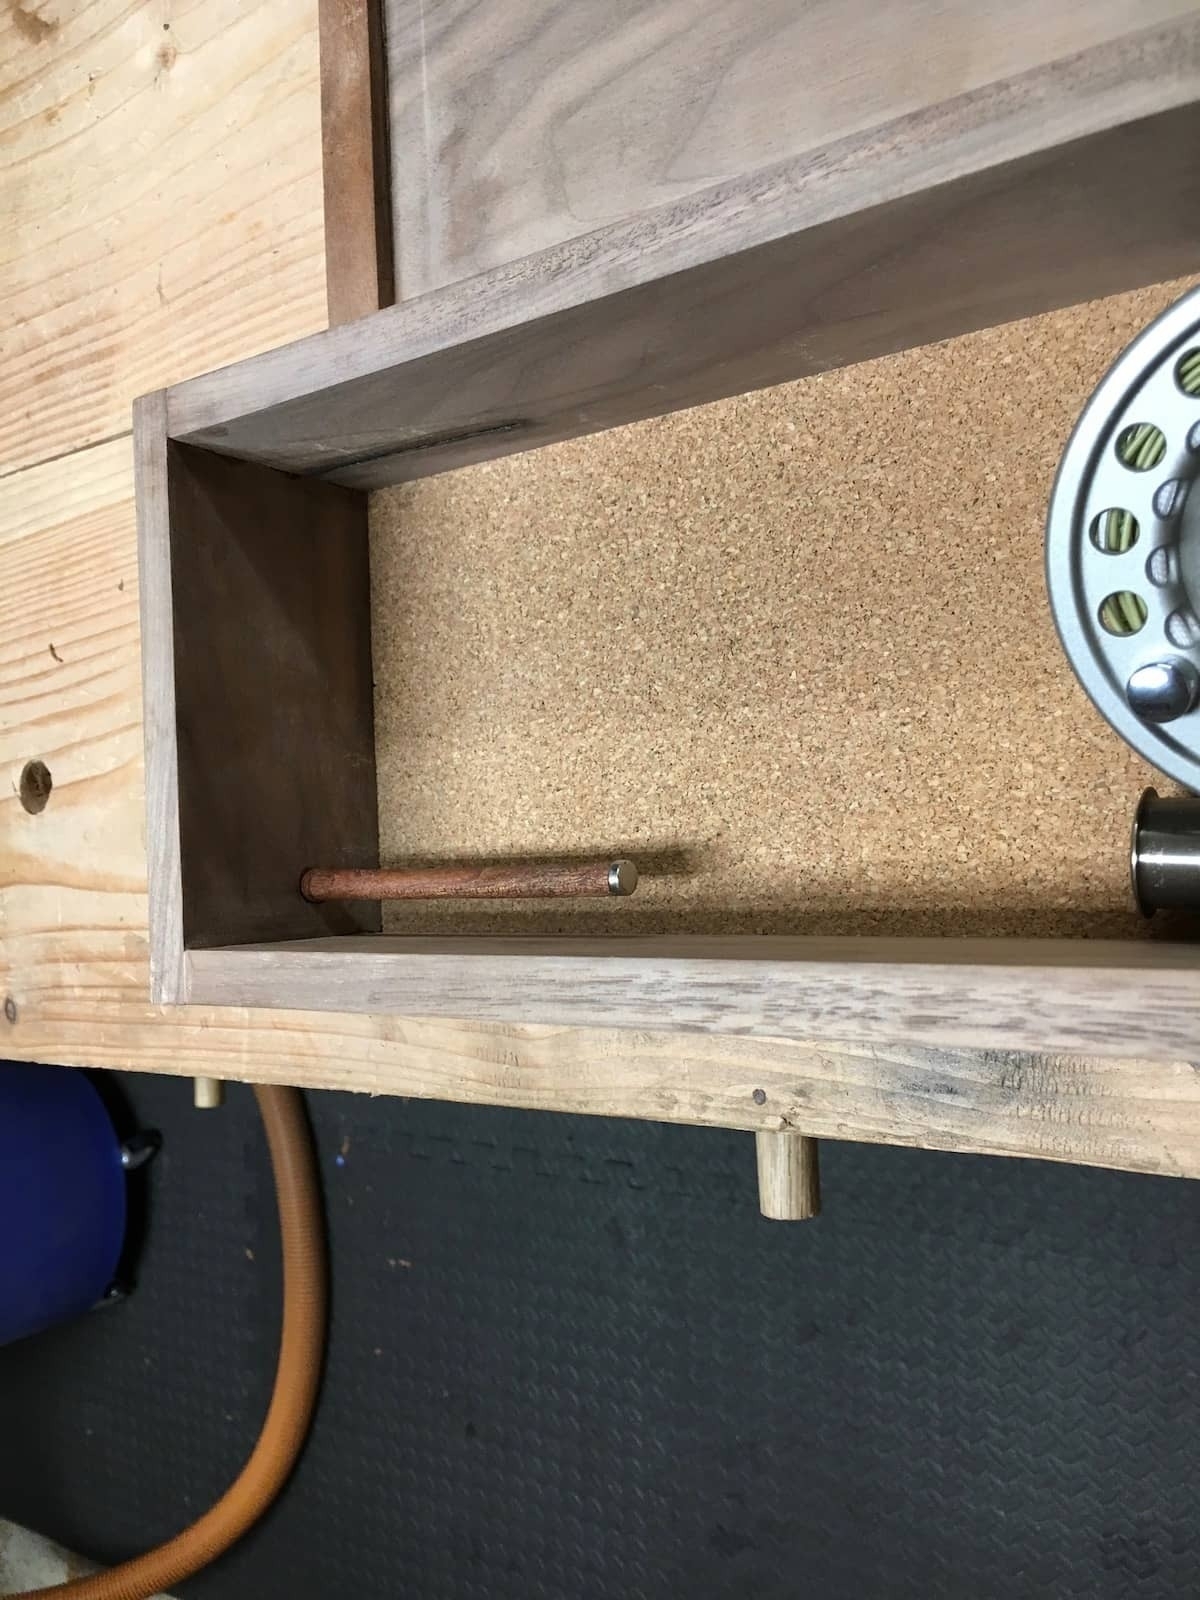 dowel attached to box, used to hold the reel